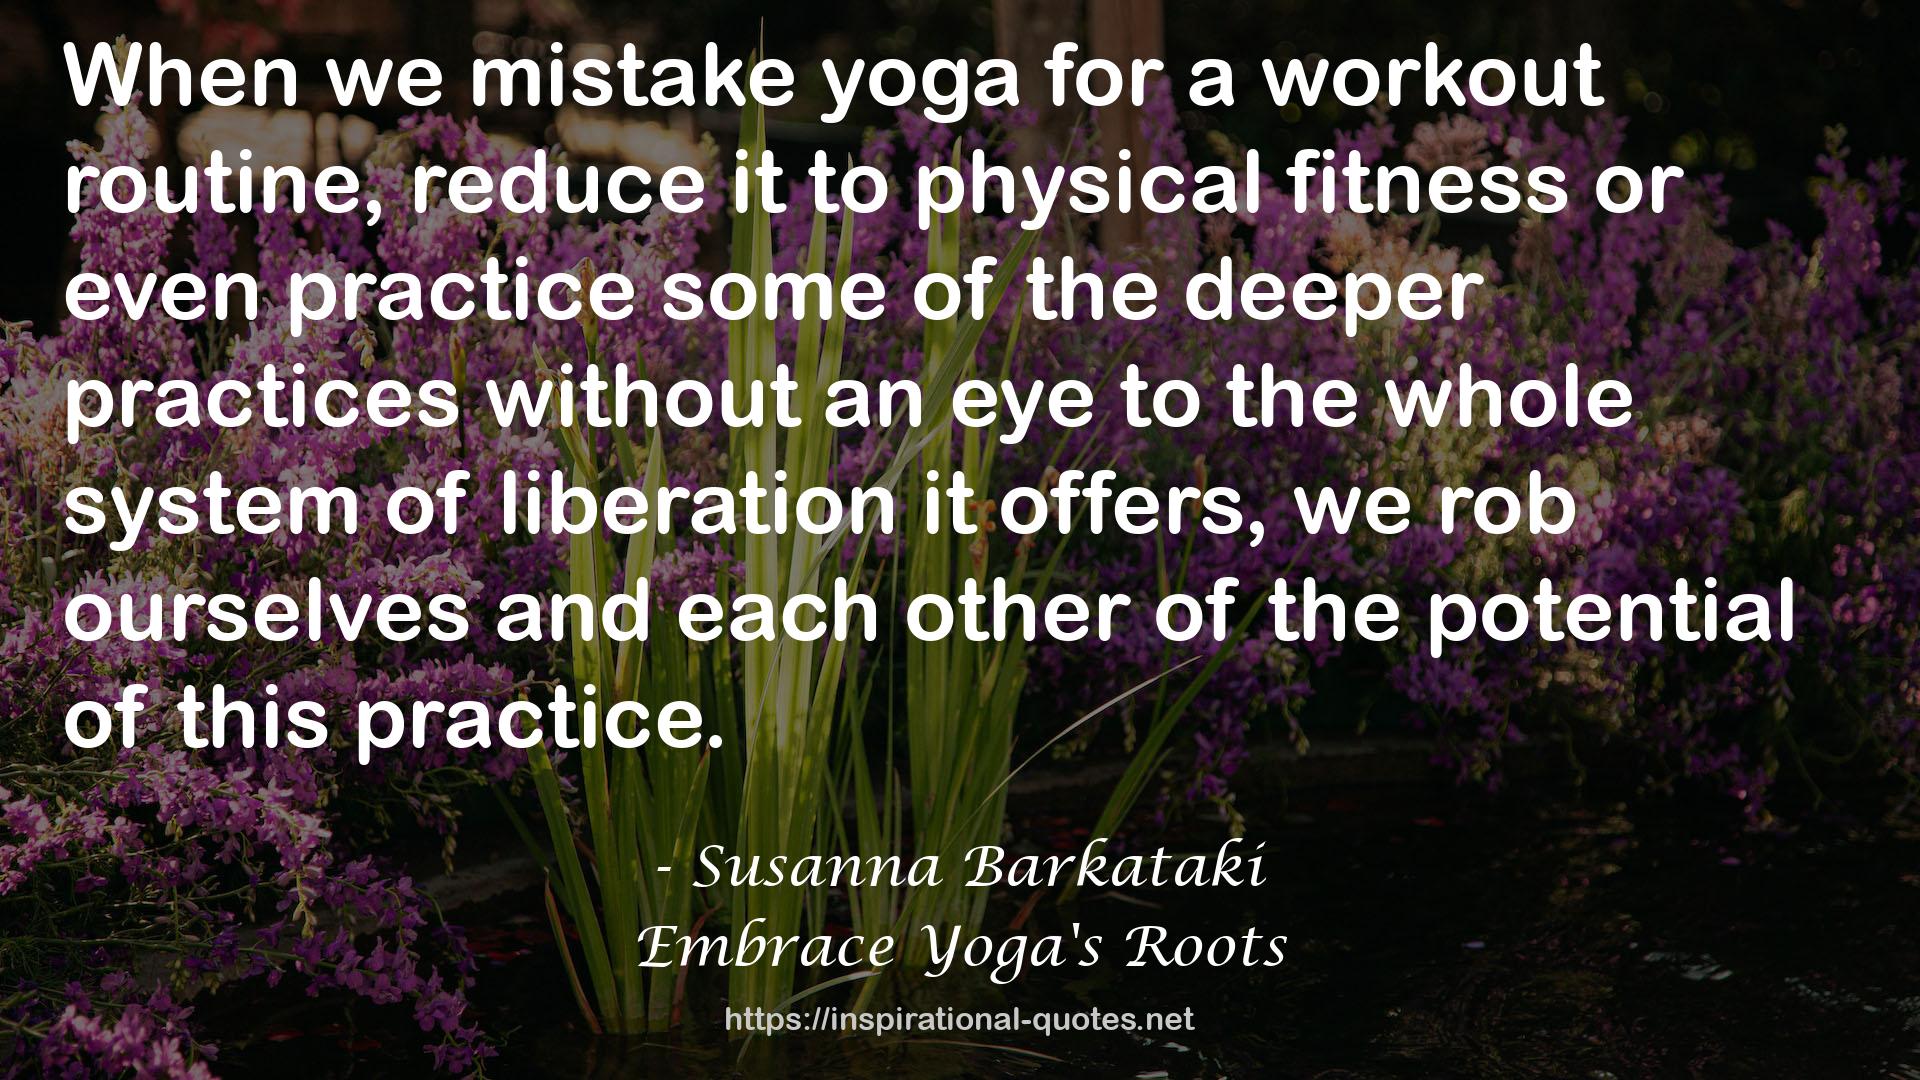 Embrace Yoga's Roots QUOTES